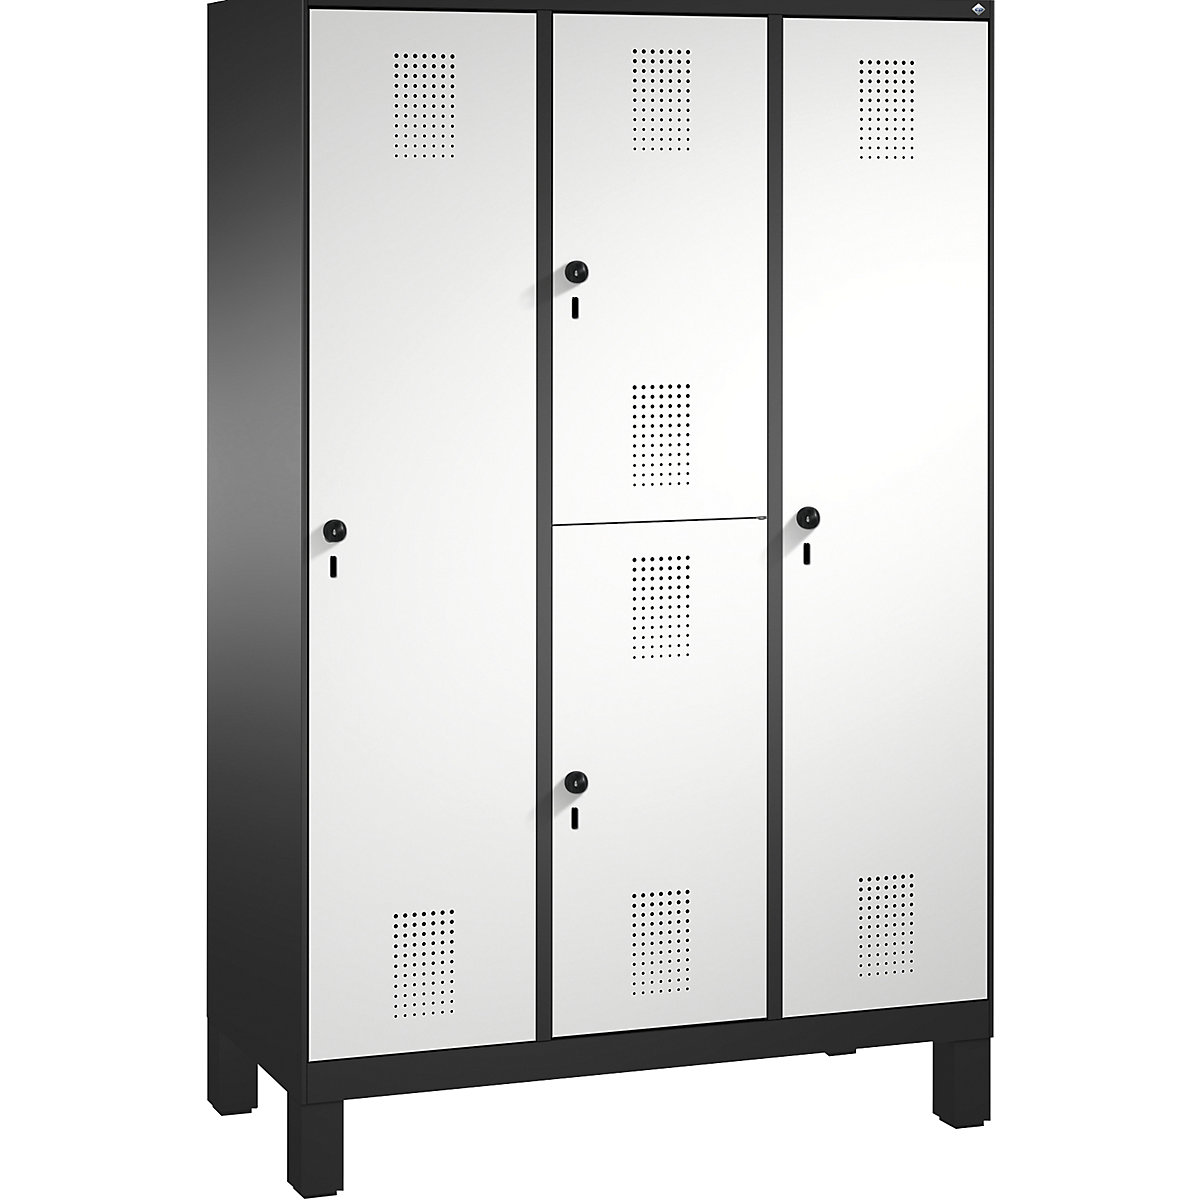 EVOLO combination cupboard, single and double tier – C+P, 3 compartments, 4 doors, compartment width 400 mm, with feet, black grey / light grey